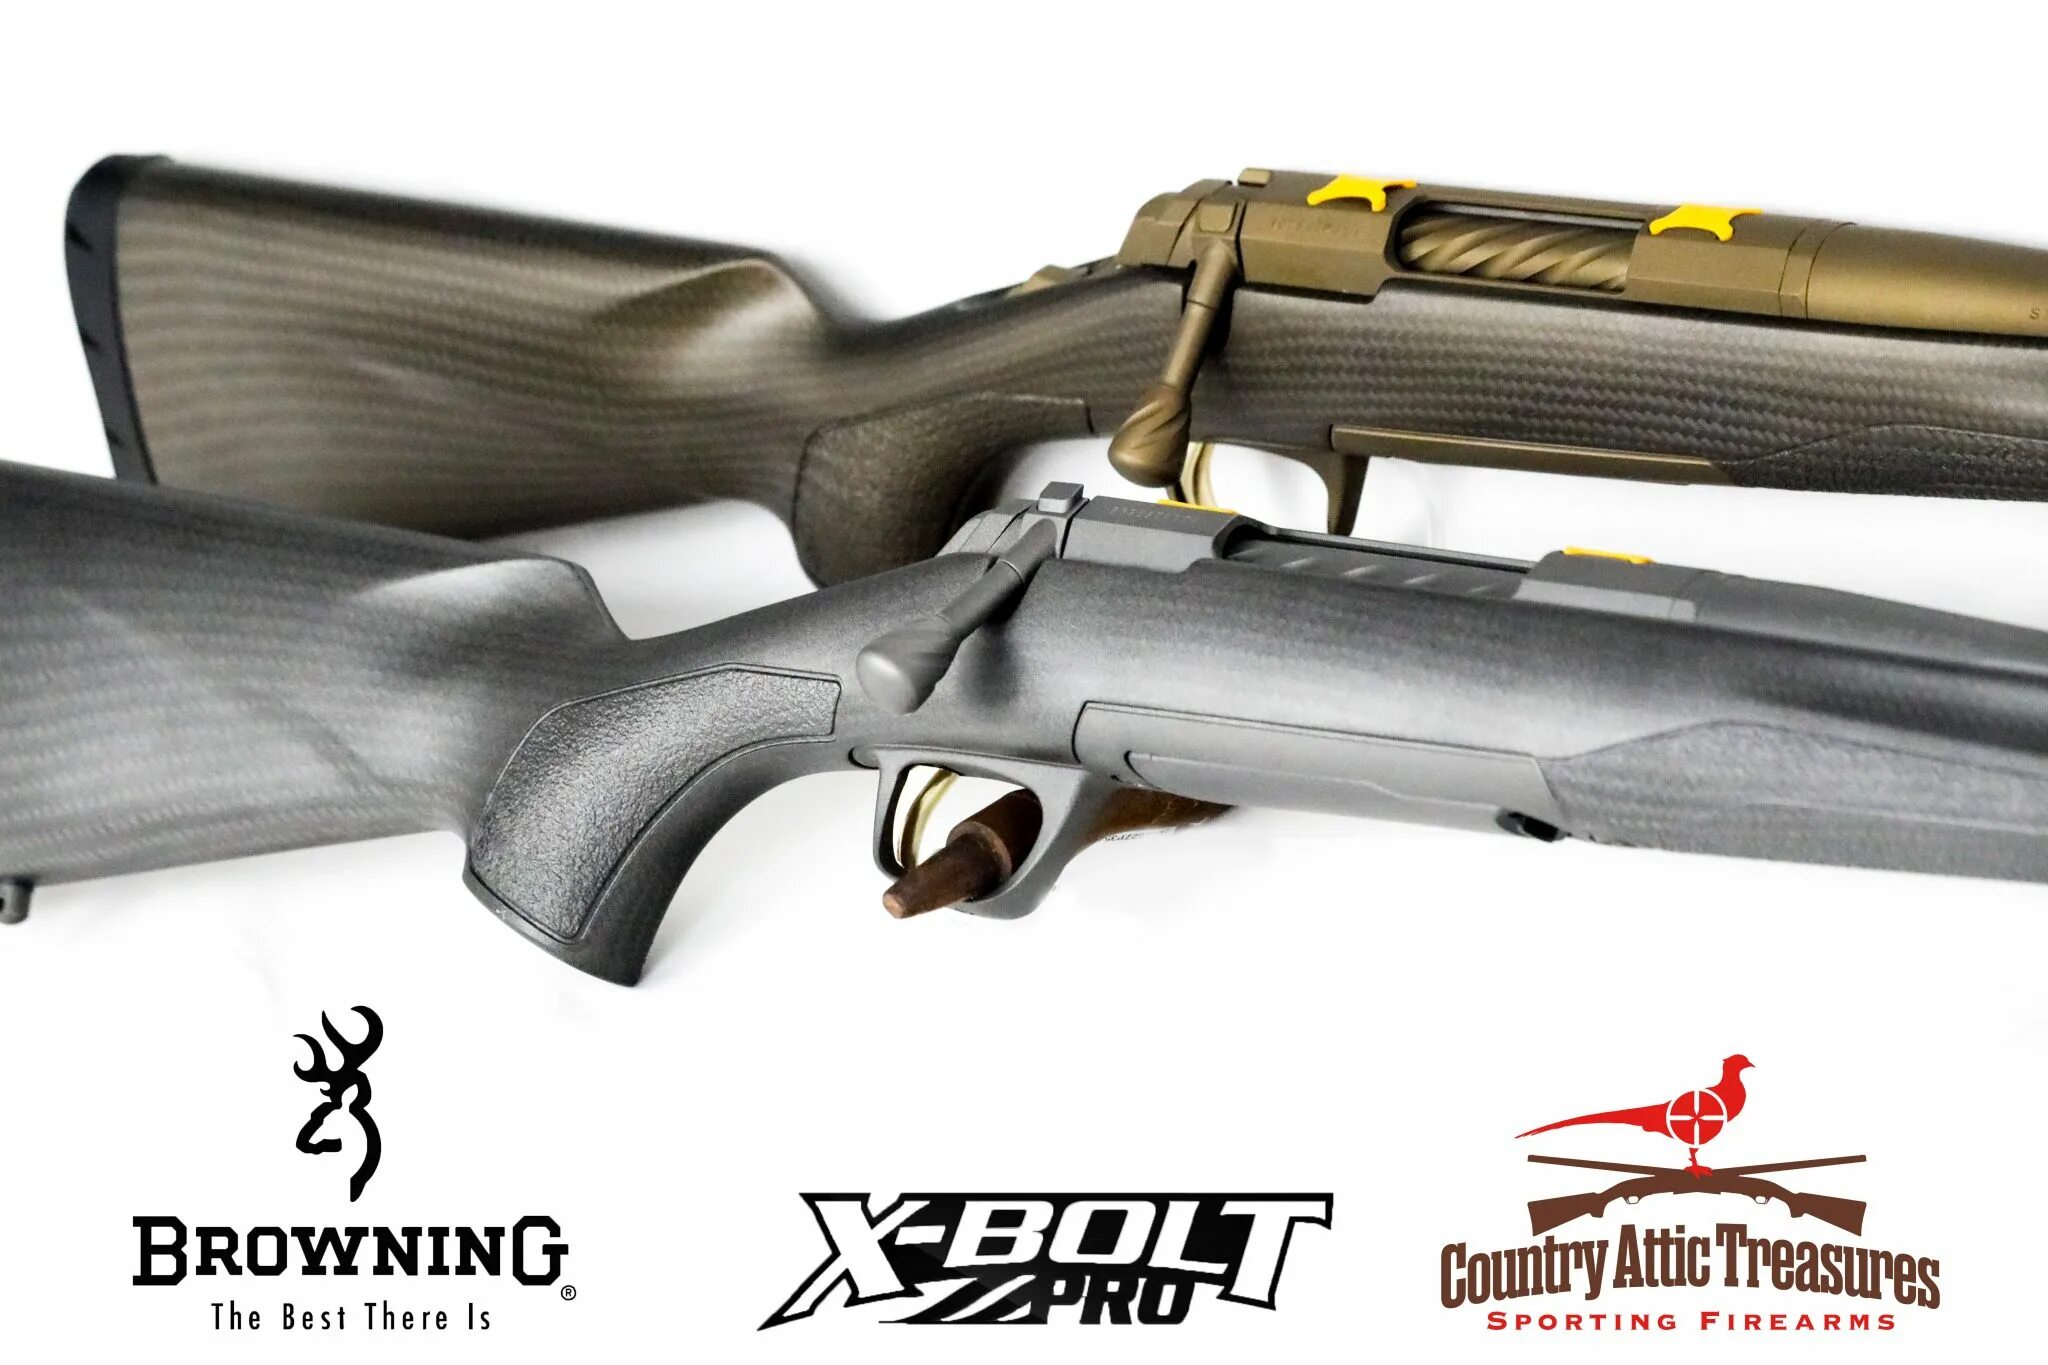 Browning shop. Browning x-Bolt Pro Carbon. Browning a-Bolt .30-06 Composite thr 530. Browning x-Bolt .30-06 SF Max Varmint thr 610. Browning x80.